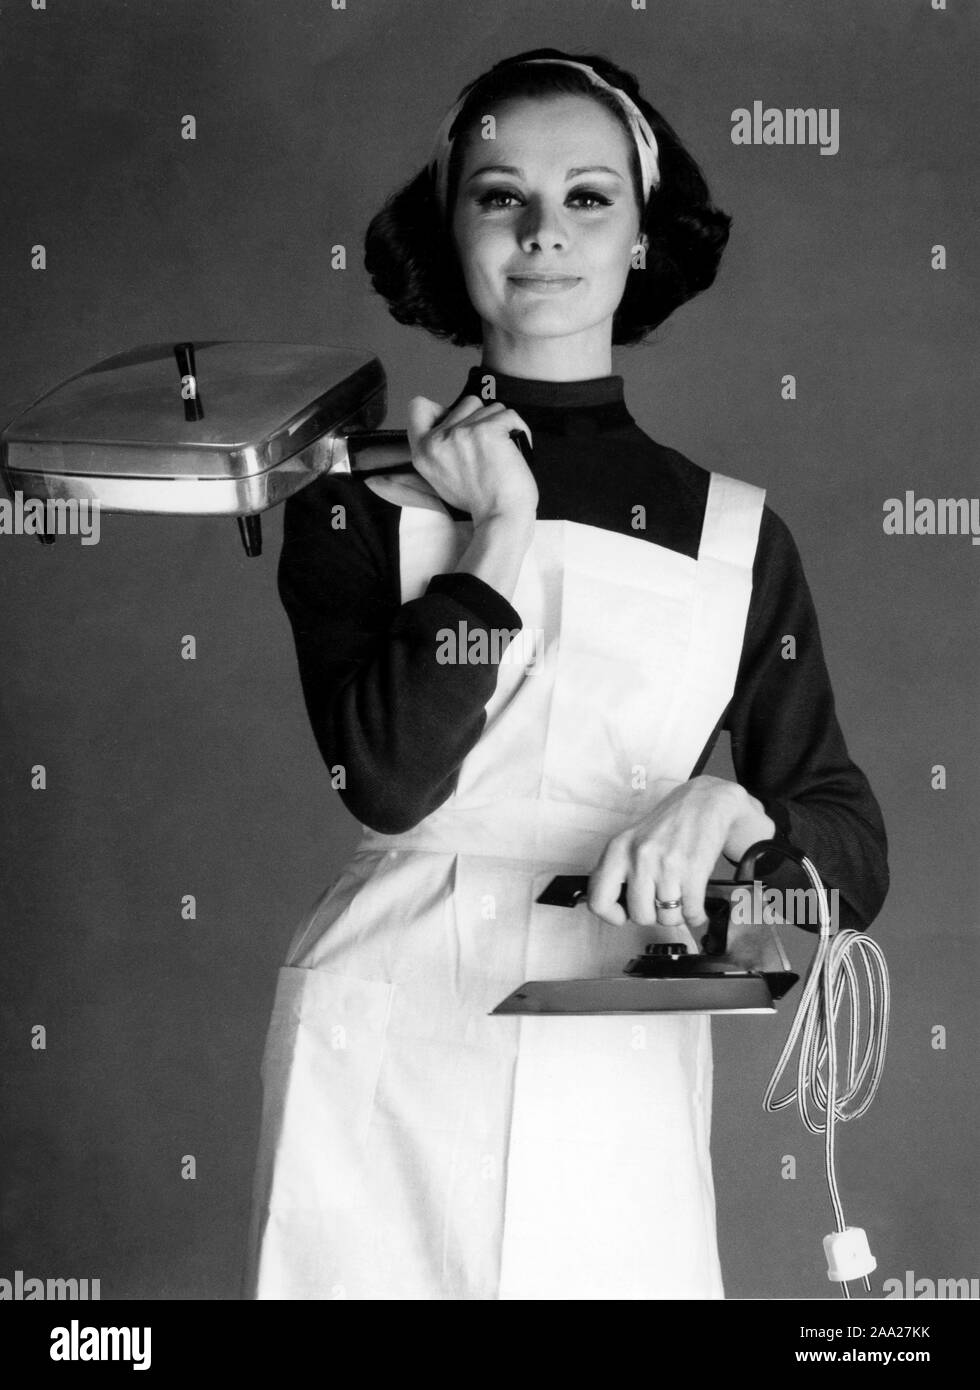 Back in the 1960s. A young woman is holding a flat iron and an electric whaffle iron made by Elektro Helios. Sweden 1963 Stock Photo